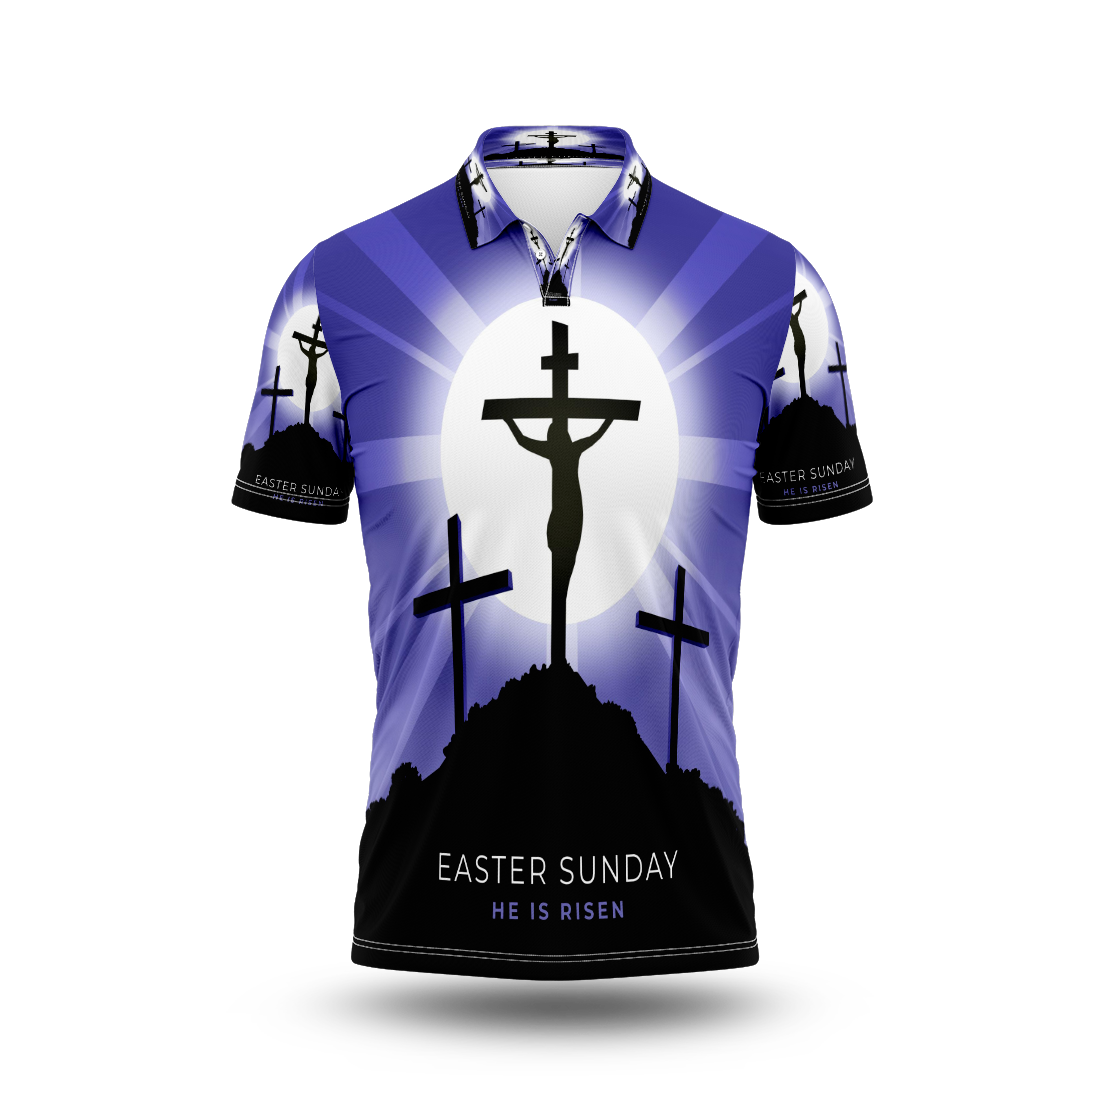 Easter Sunday Printed T-Shirt.